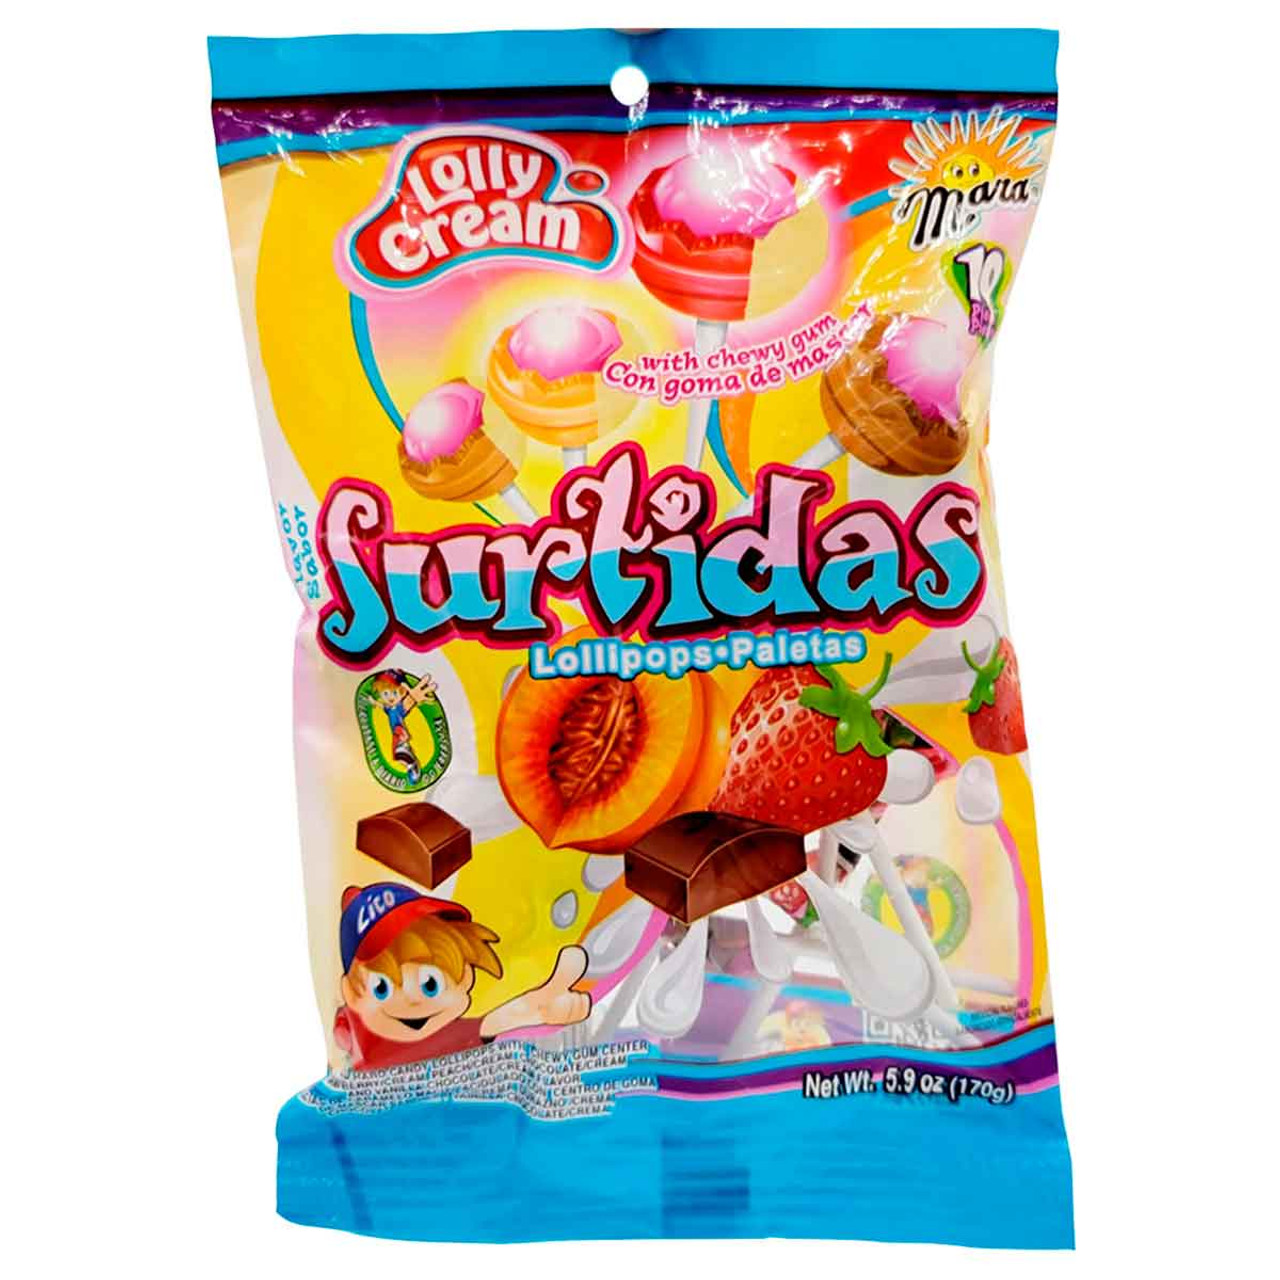 Package with ten delicious pieces of flavored hard candy lollipops full of fruity and creamy combinations like strawberry and cream, chocolate and vanilla and many more.